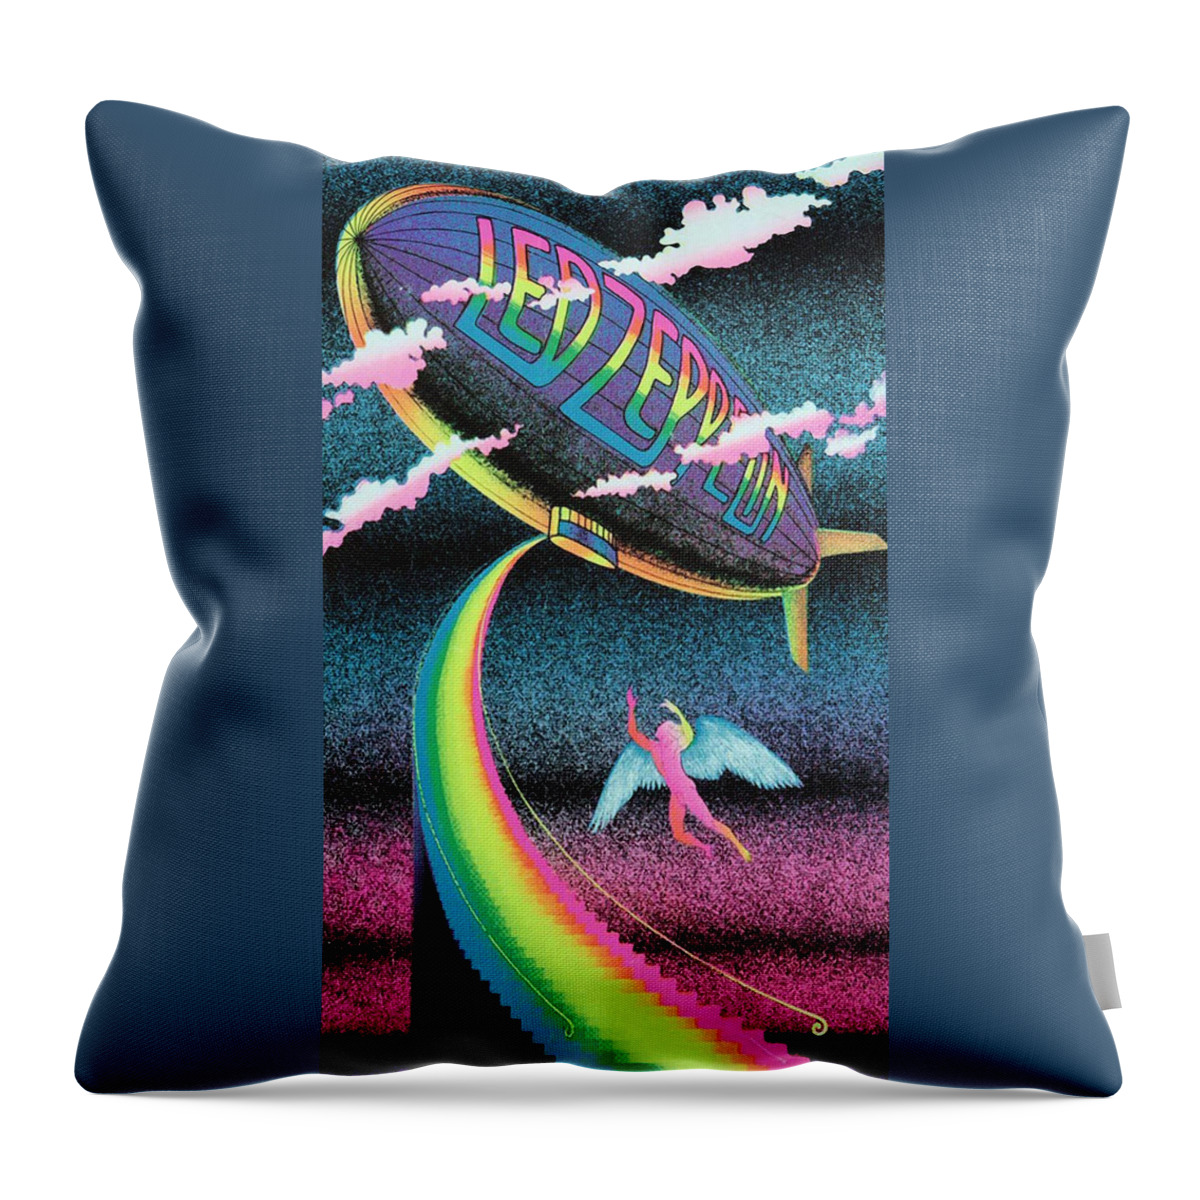 Led Zeppelin Throw Pillow featuring the painting Led Zeppelin Poster - Stairway To Heaven by Led Zeppelin